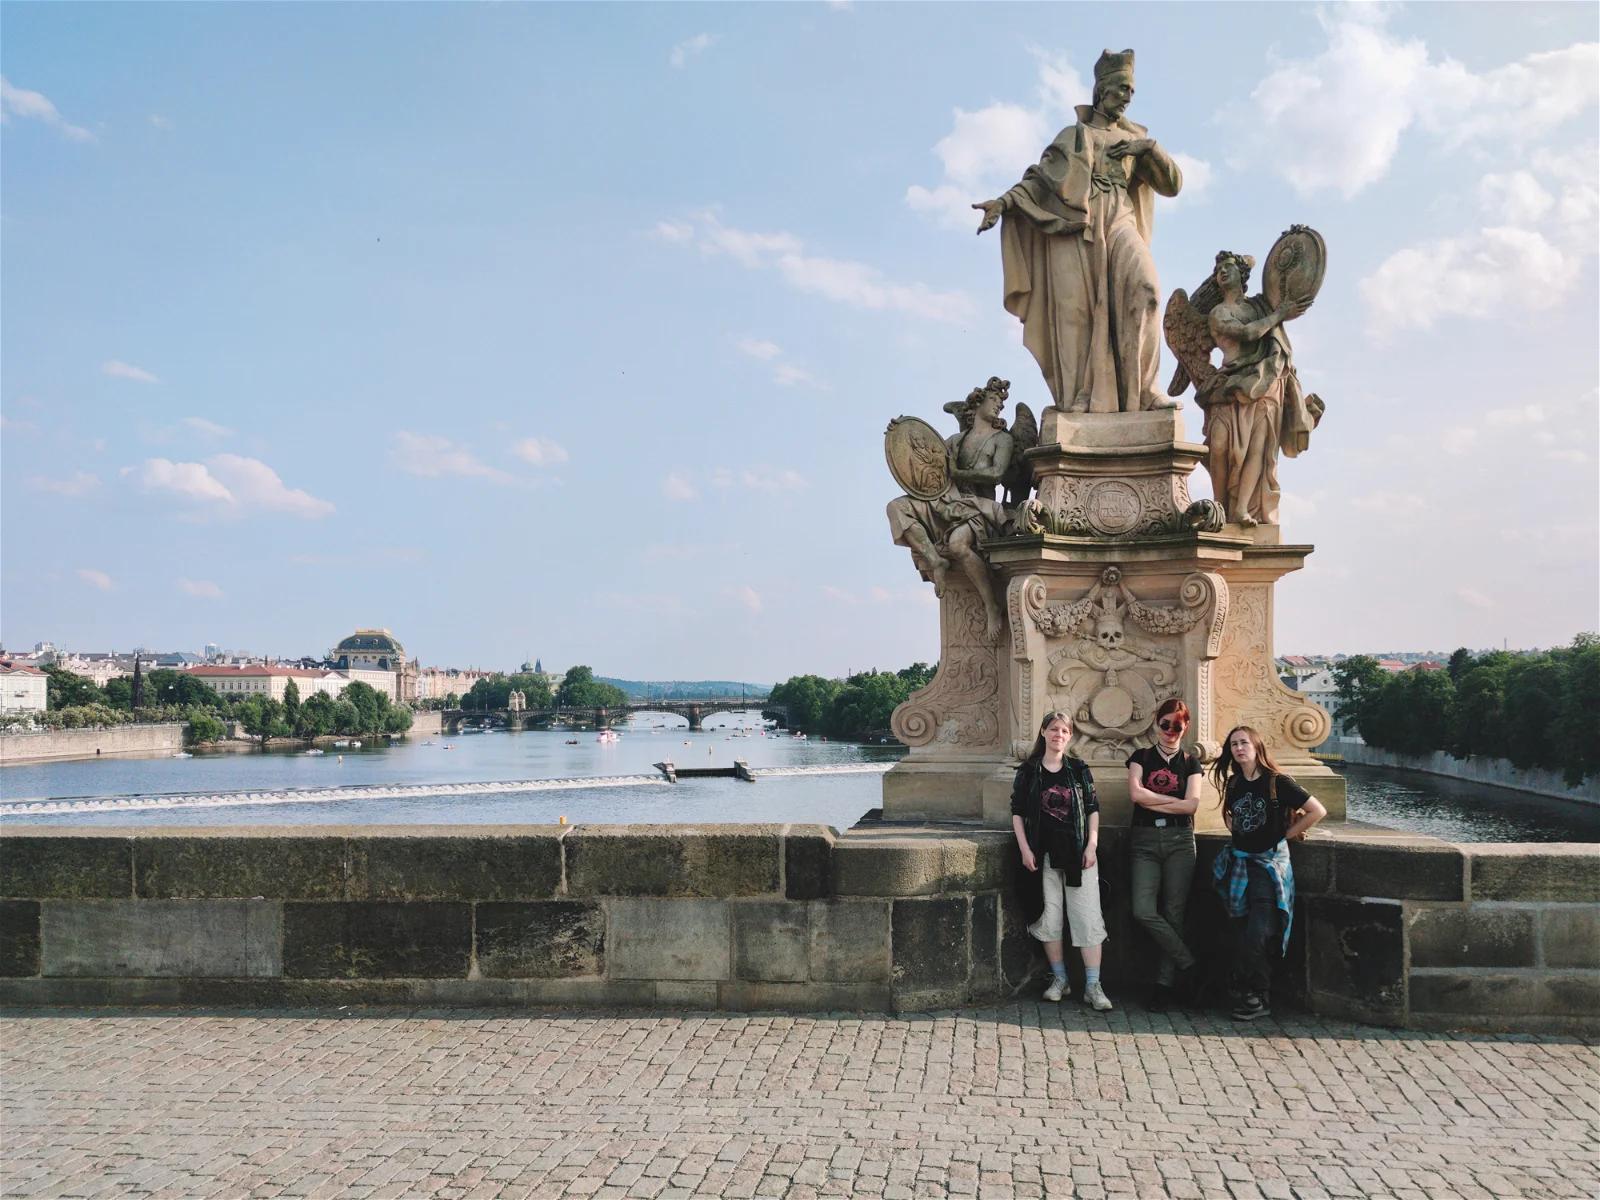 A photograph of people posing with a statue on a bridge, likely a tourist spot, with a river and cityscape in the background.